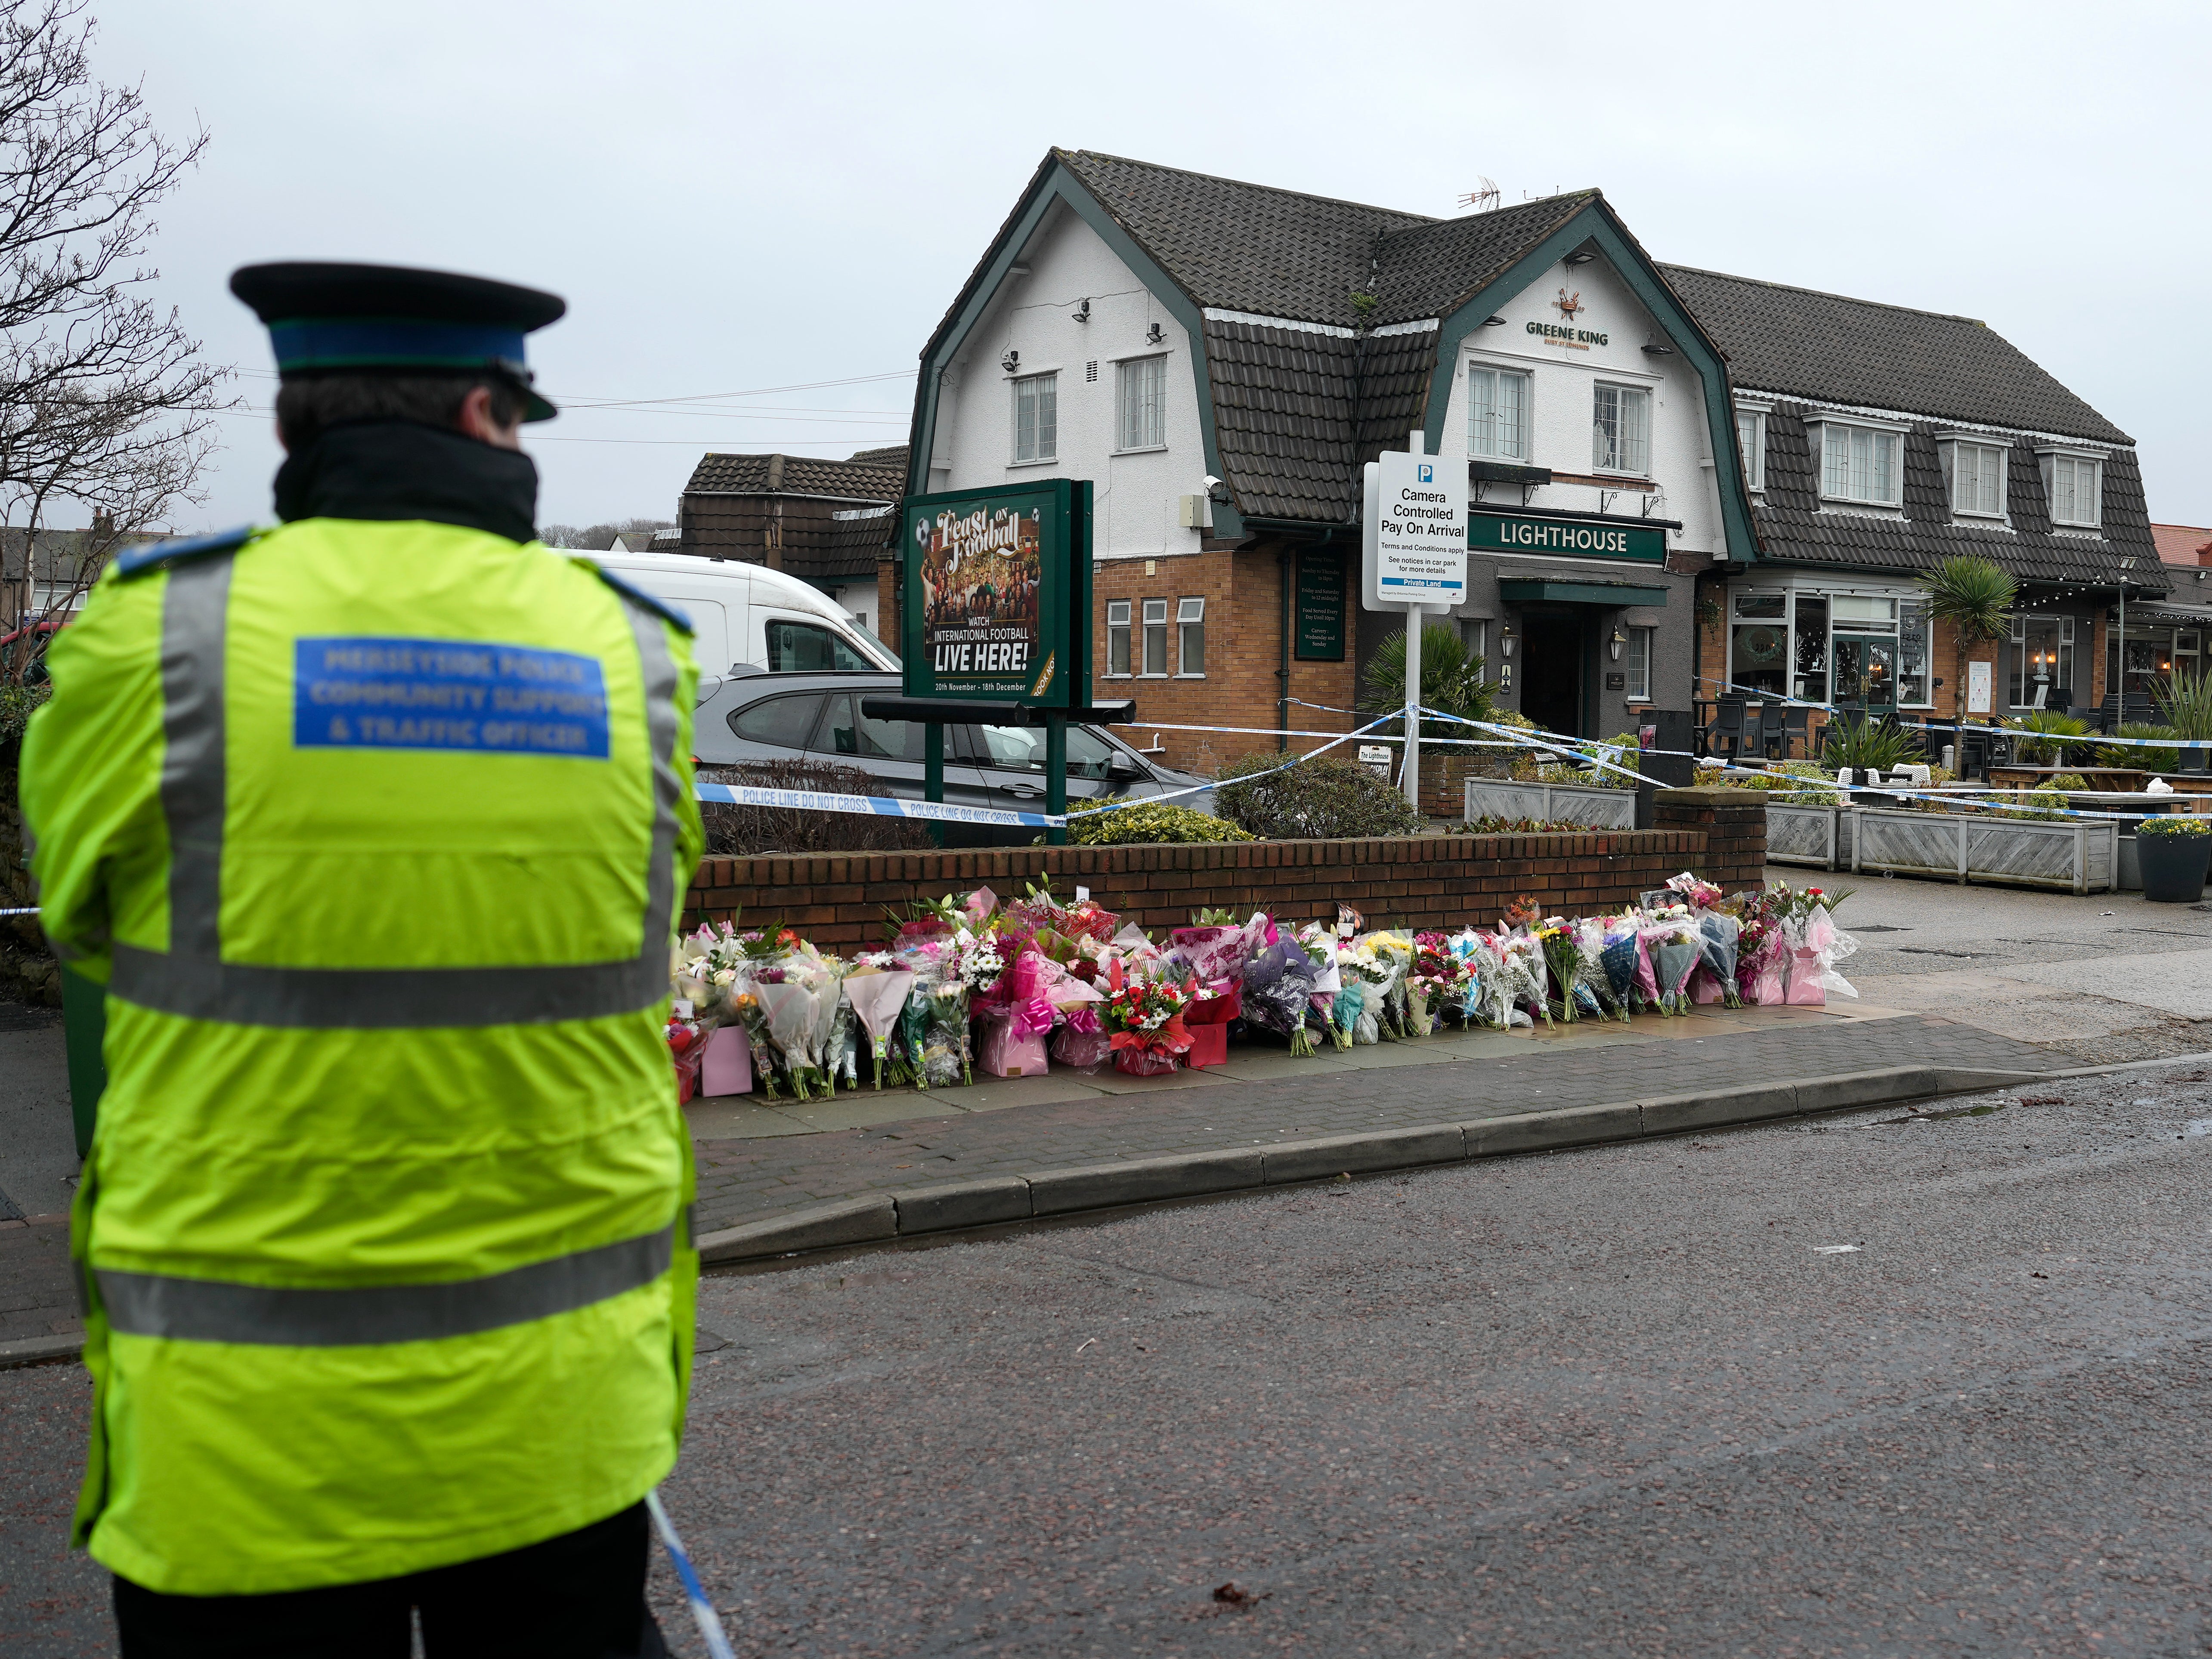 Police stand watch at the pub, where flowers were laid after the killing